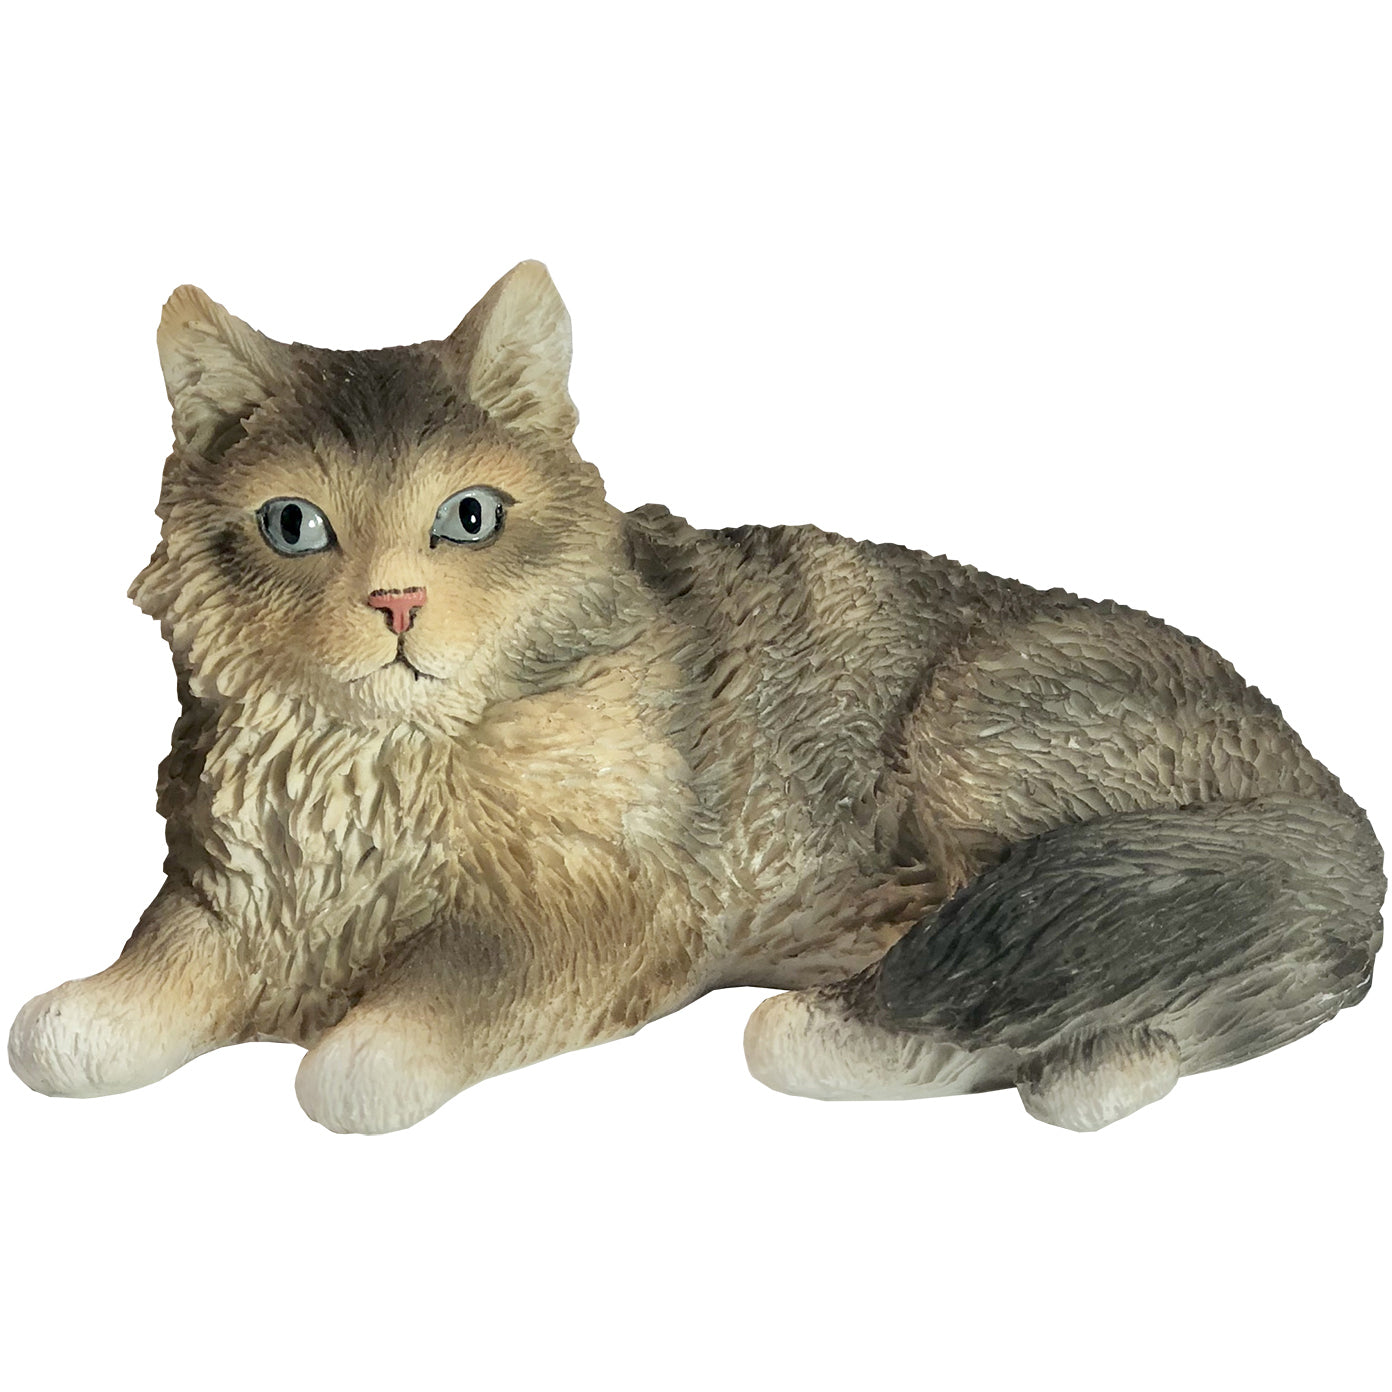 Brown Tabby Maine Coon Cat Sculpture